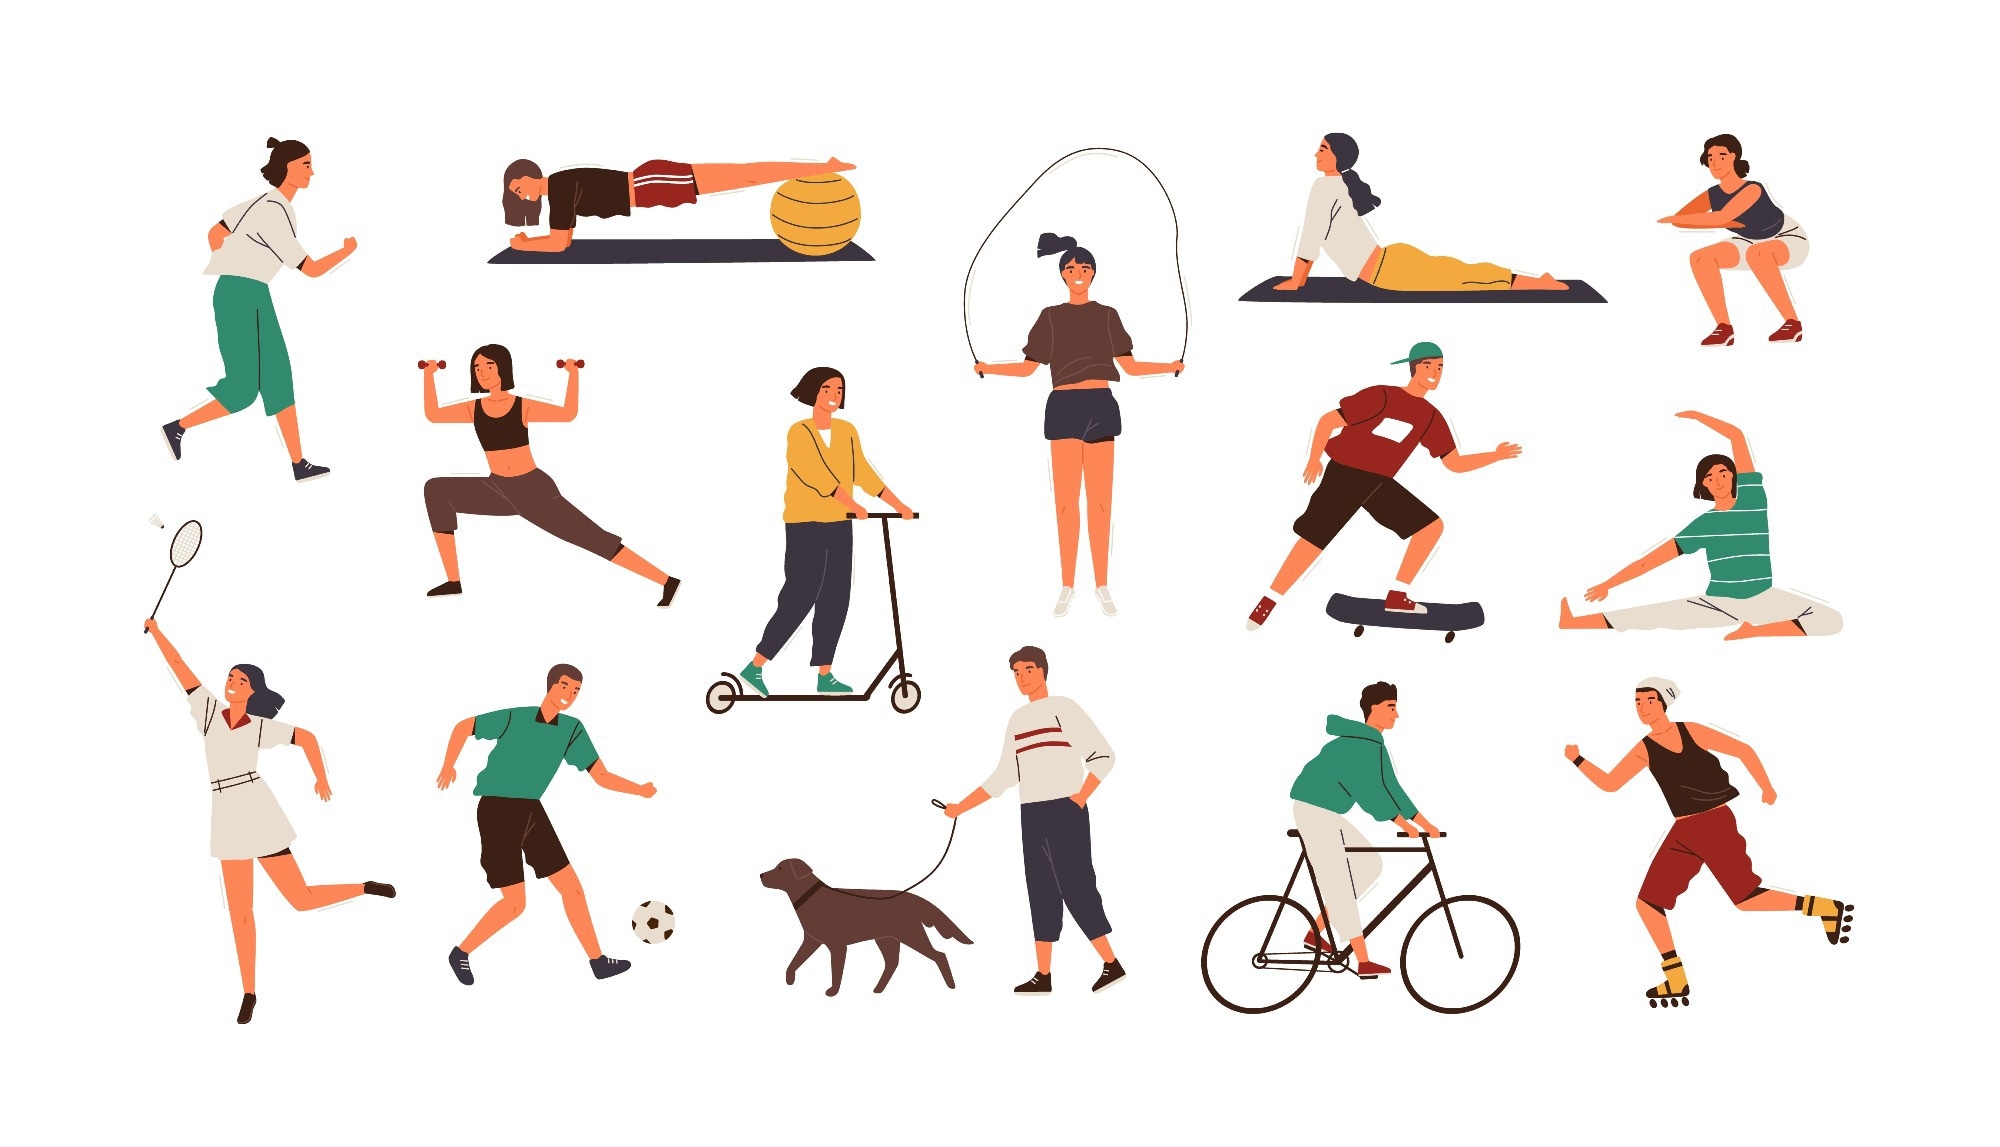 Study: Exercise and cardiovascular health: A state-of-the-art review. Image Credit: GoodStudio/Shutterstock.com